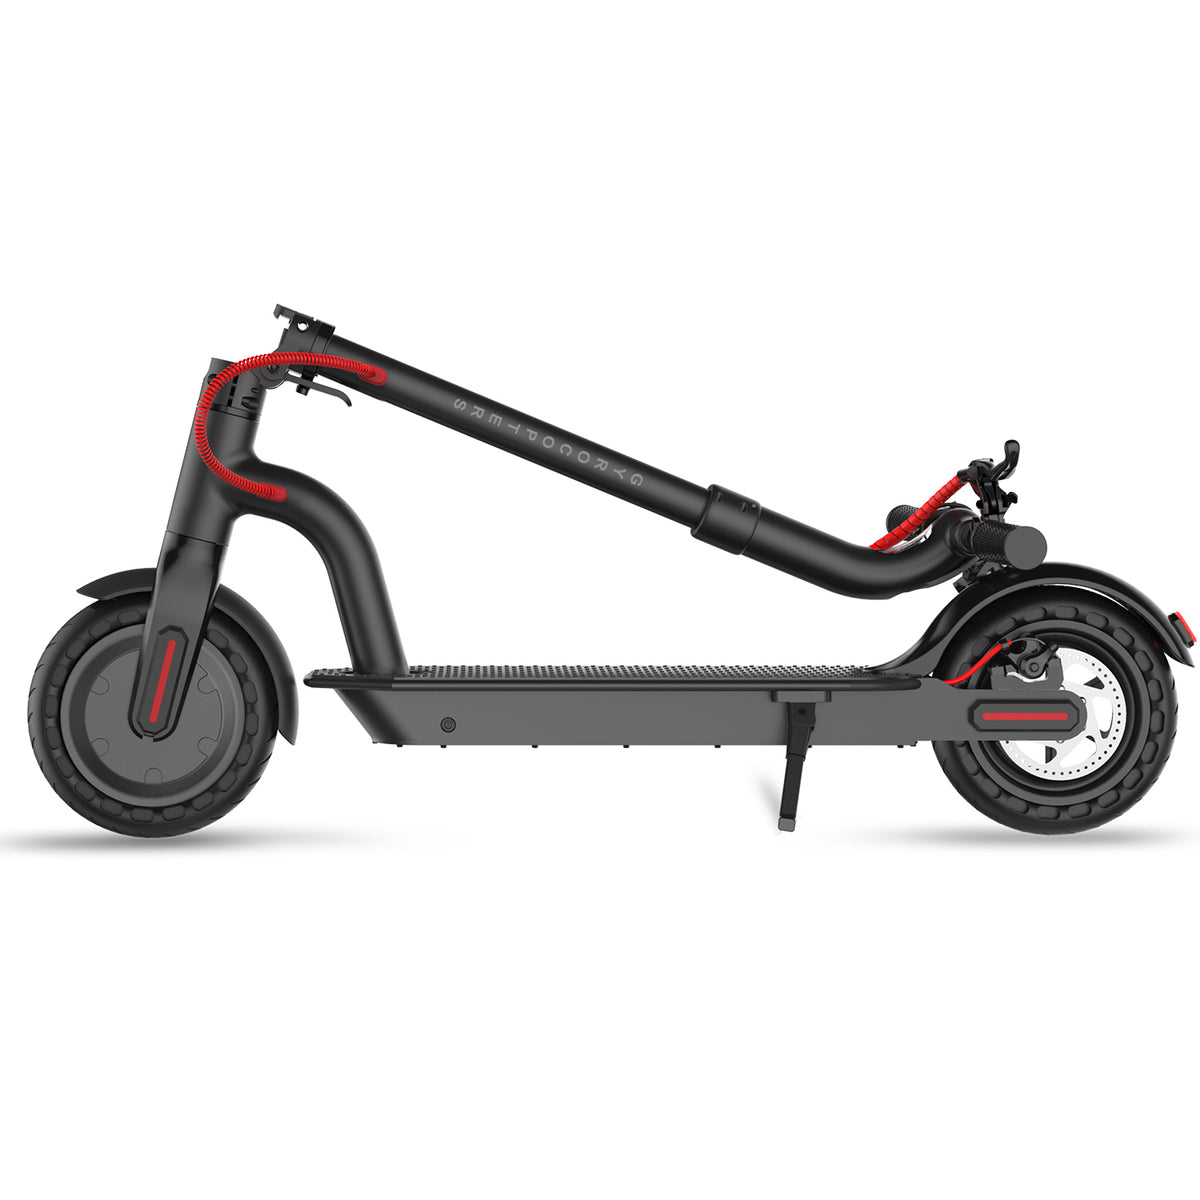 best electric scooter, adventure scooter, off road scooter, all terrain scooter, all terrain wheels scooter